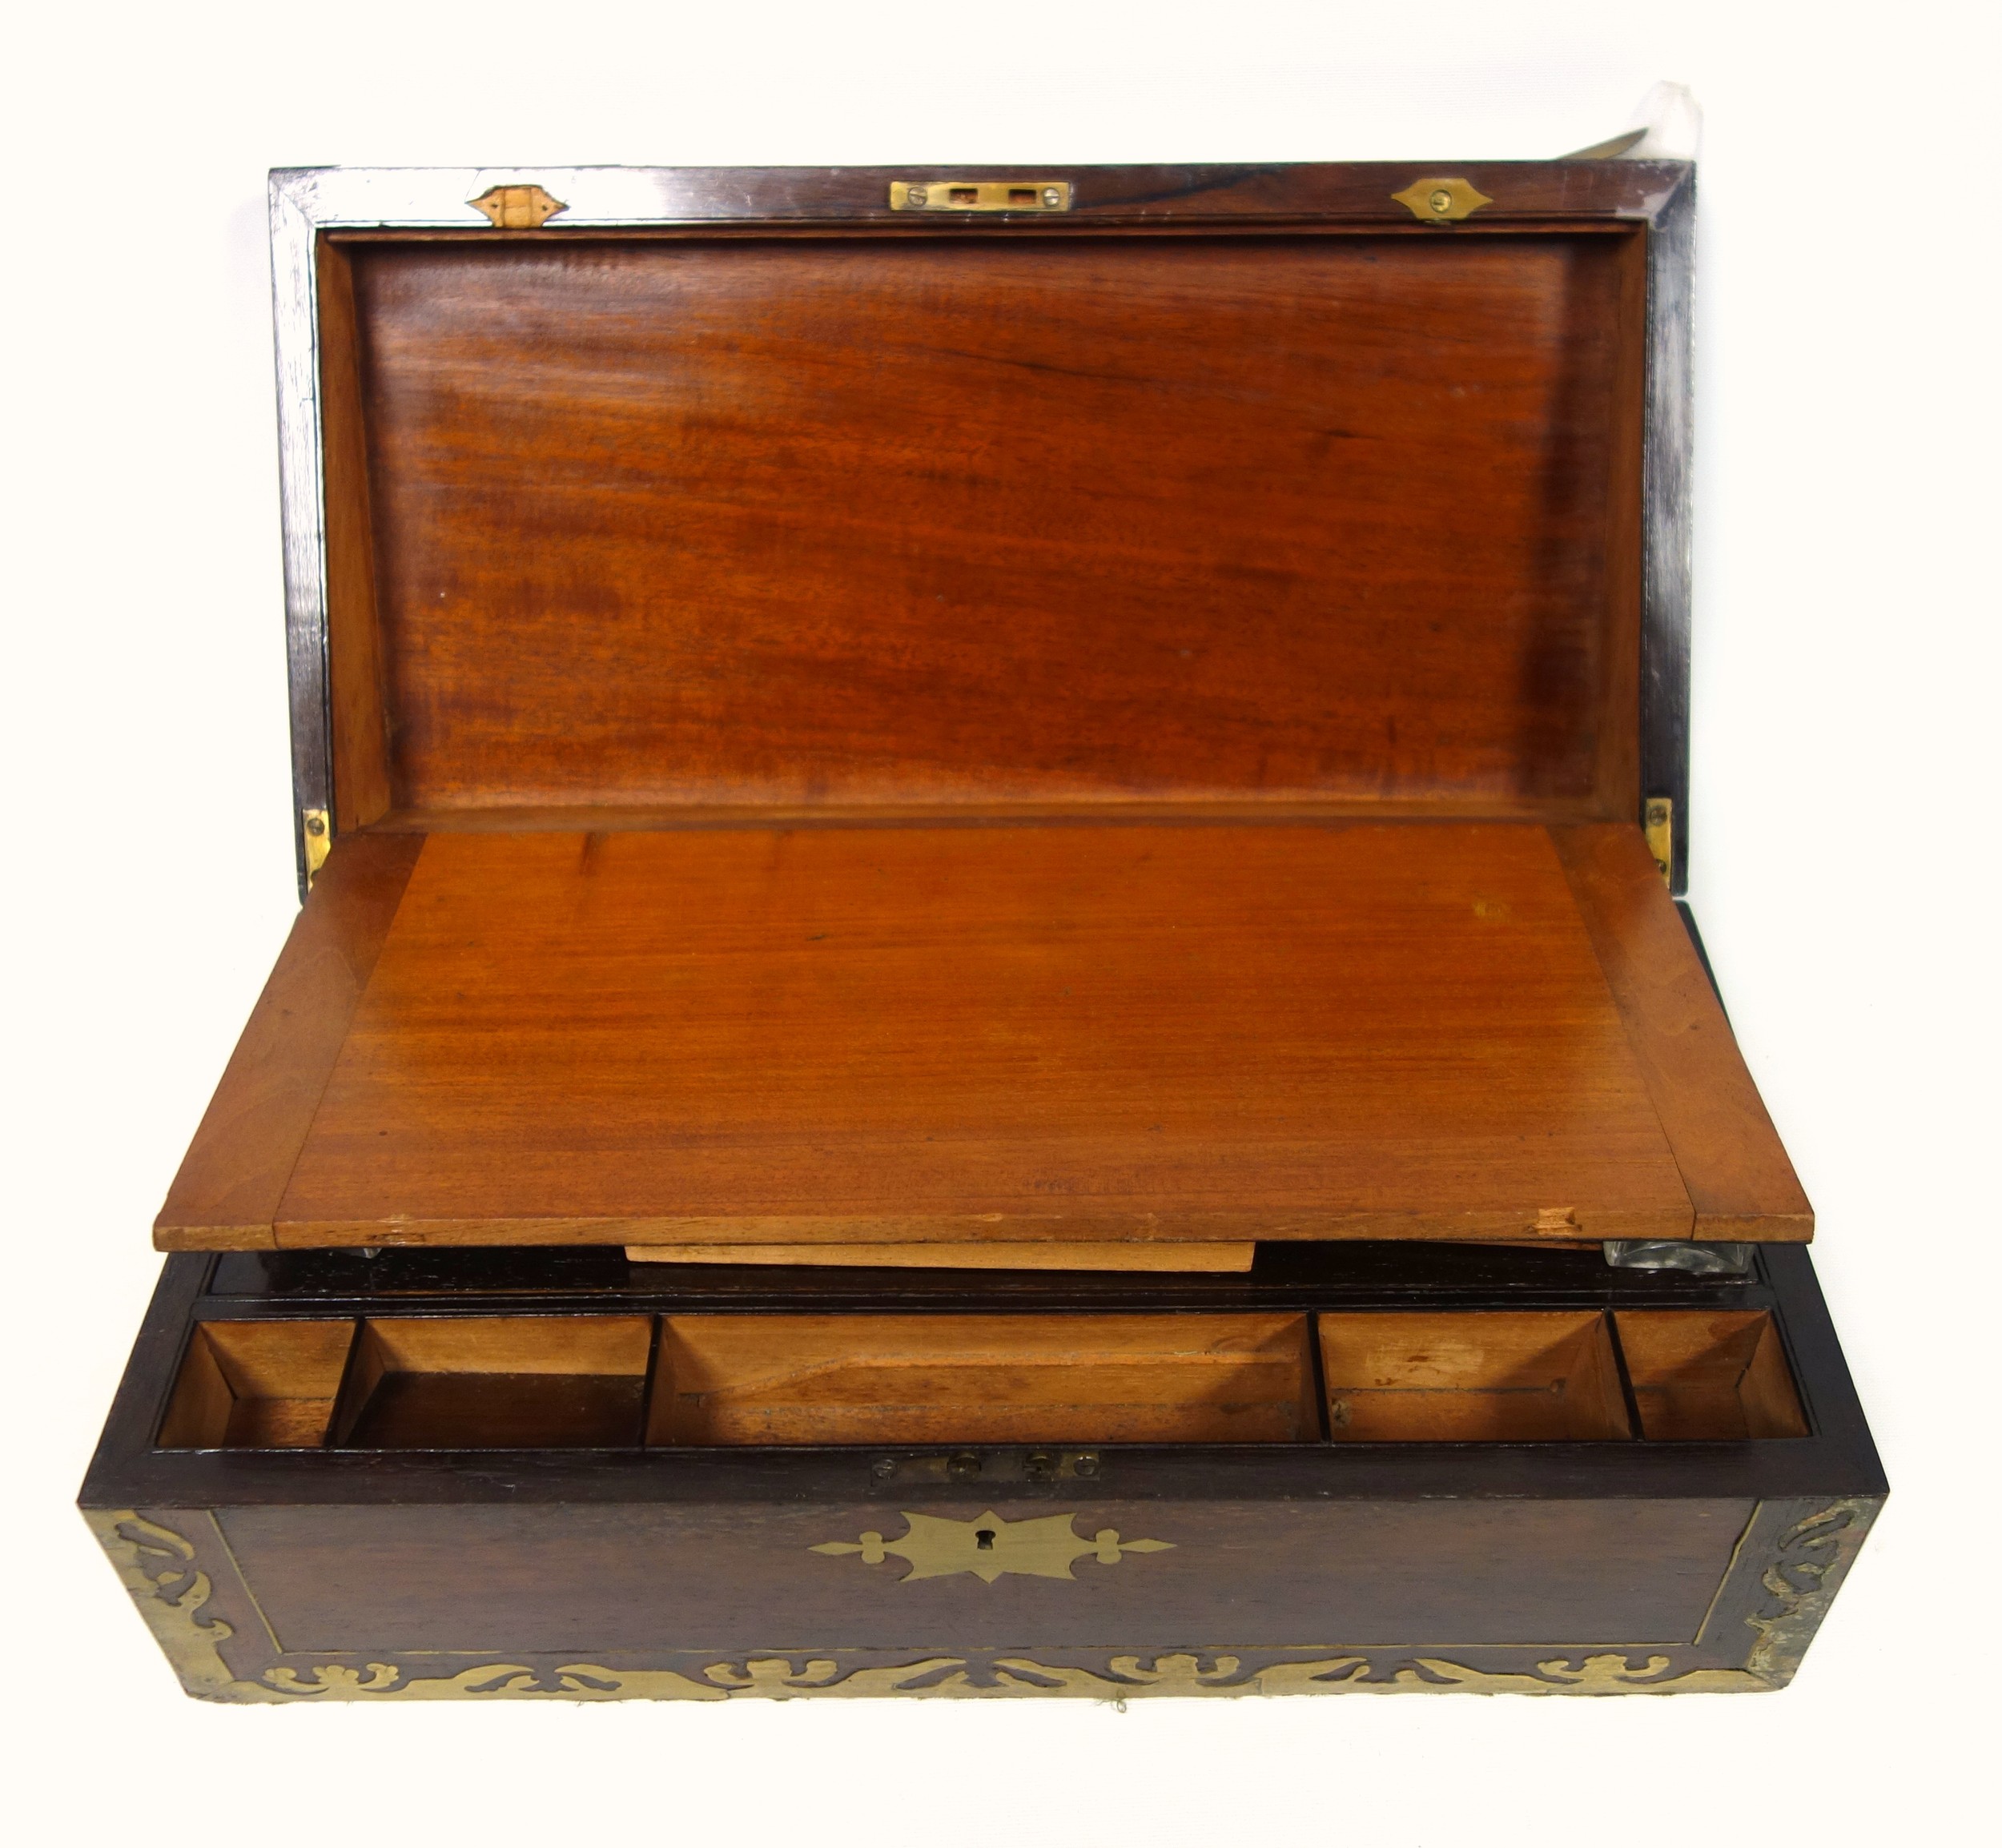 Victorian brass inlaid rosewood portable writing desk with 2 brass covered wells and secret panel - Image 4 of 14